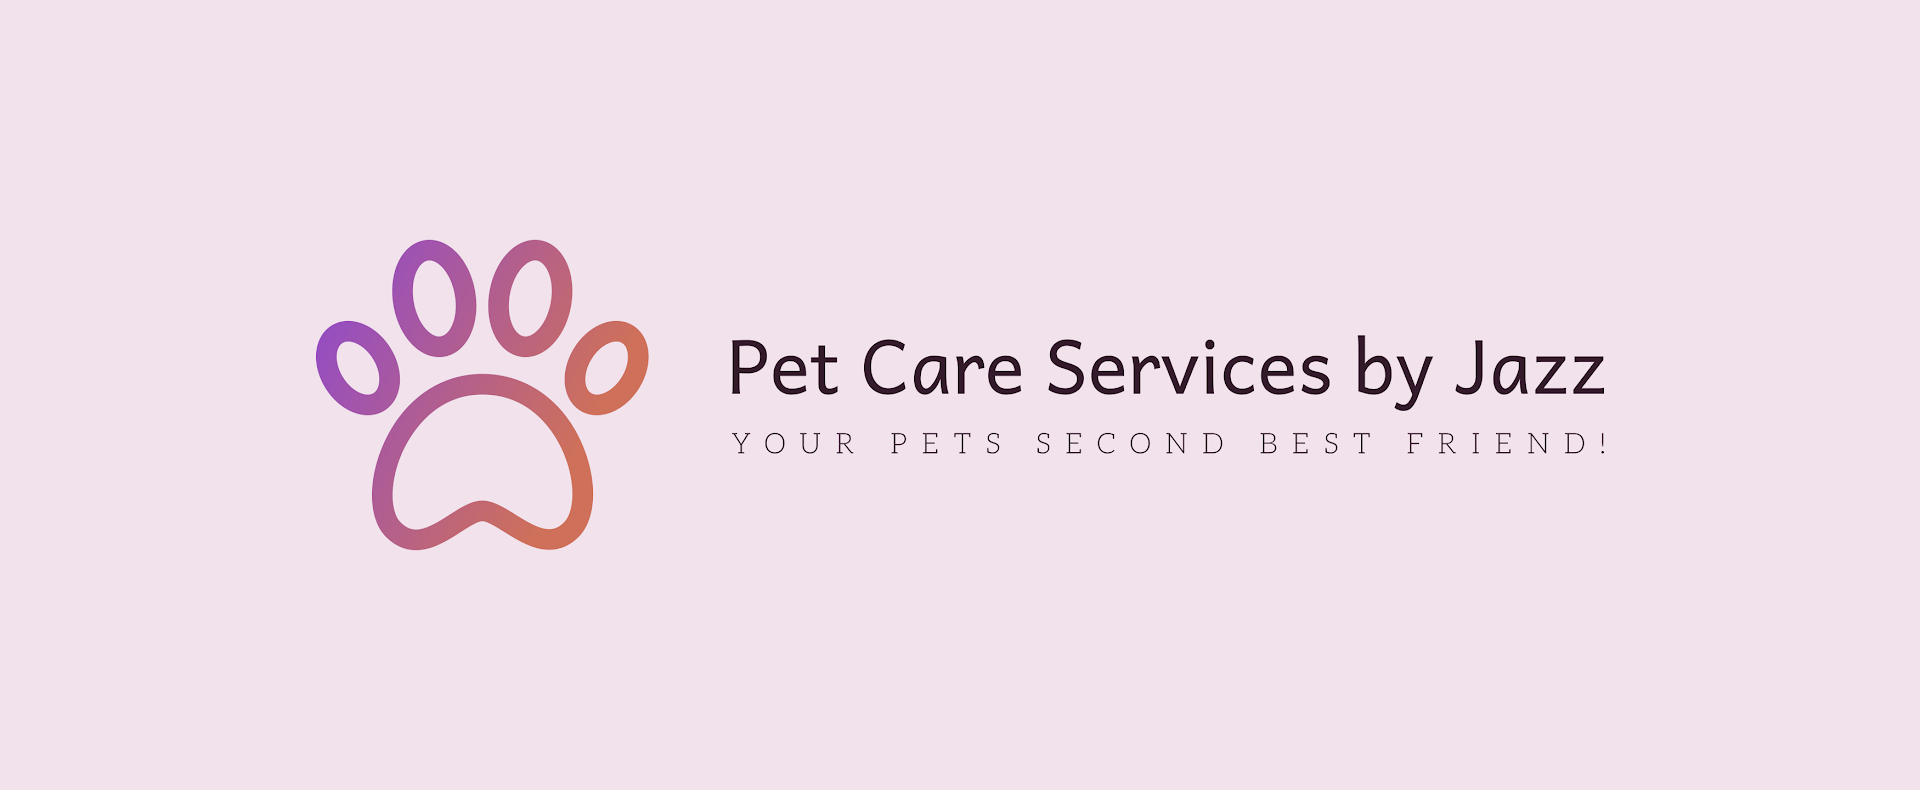 Pet Care Services by Jazz